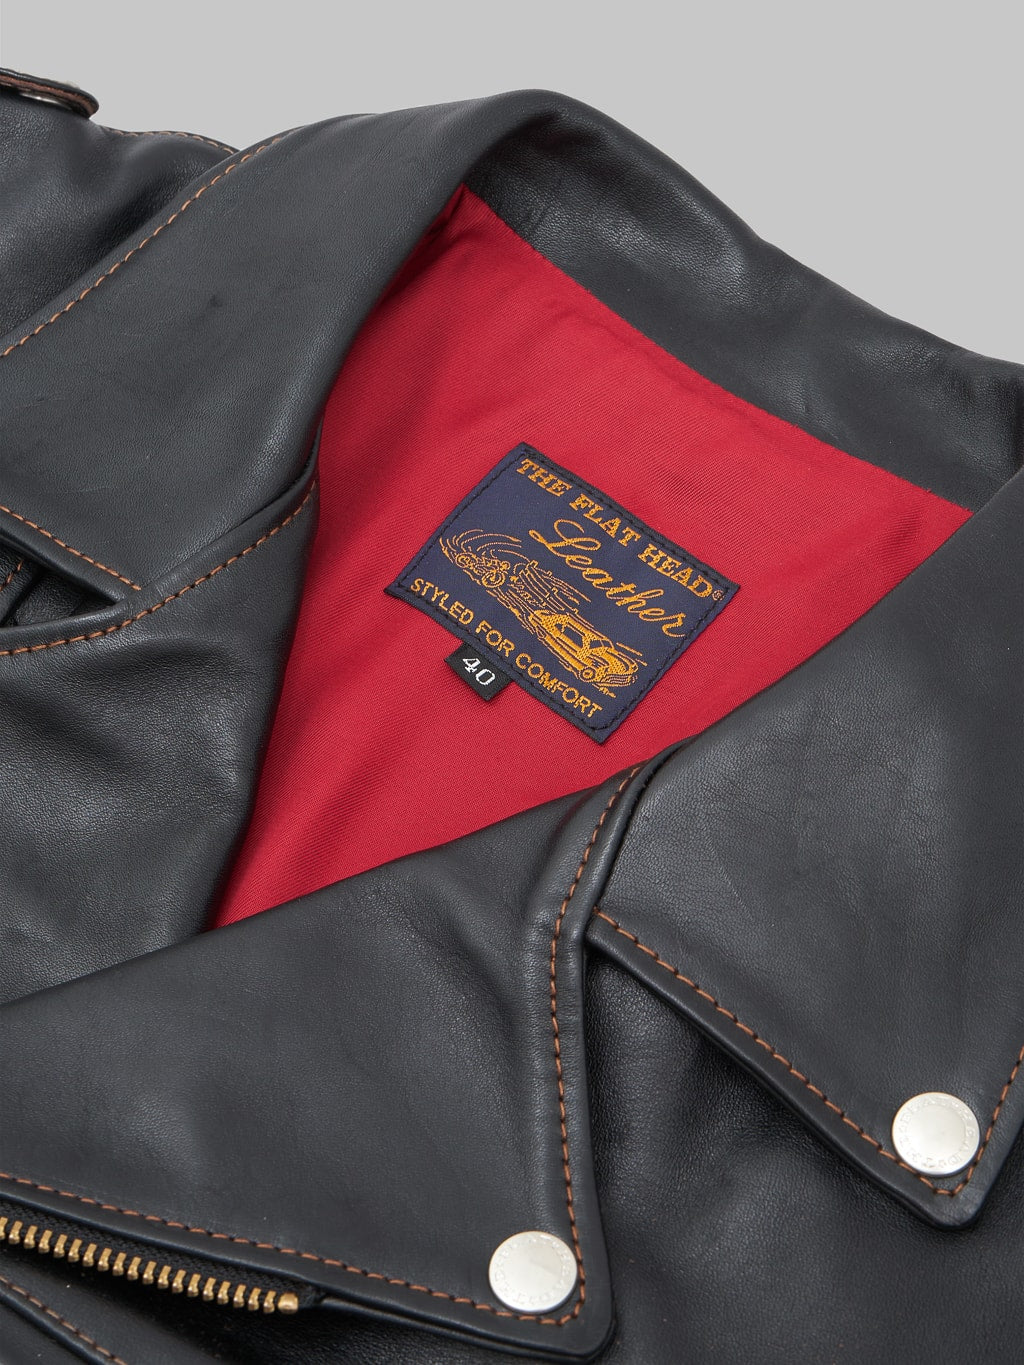 The Flat Head Horsehide Double Riders Jacket Black brand label